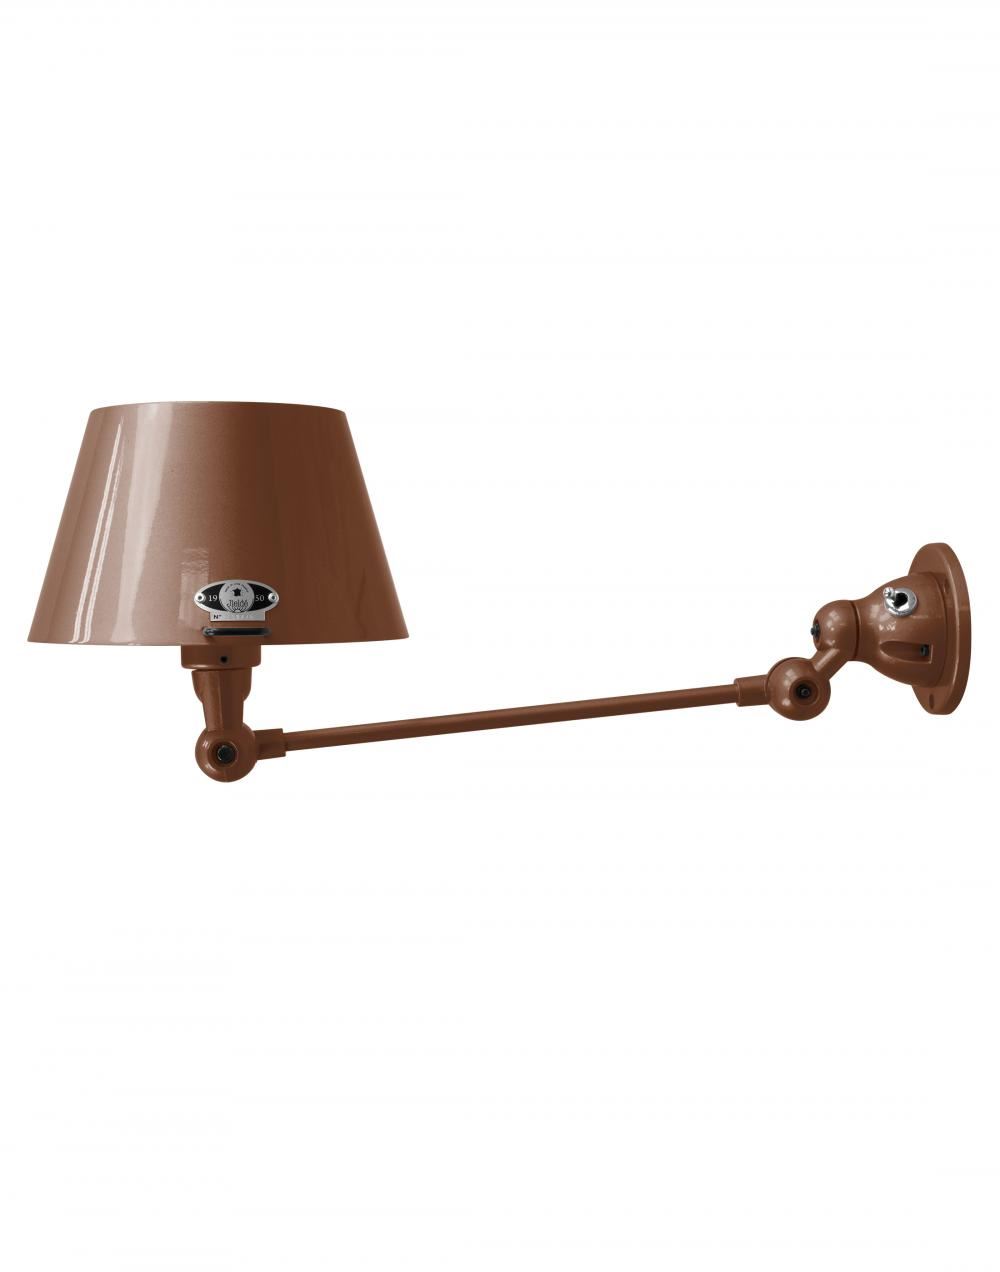 Jielde Aicler One Arm Adjustable Wall Light Straight Shade Chocolate Gloss Integral Switch On Wall Base